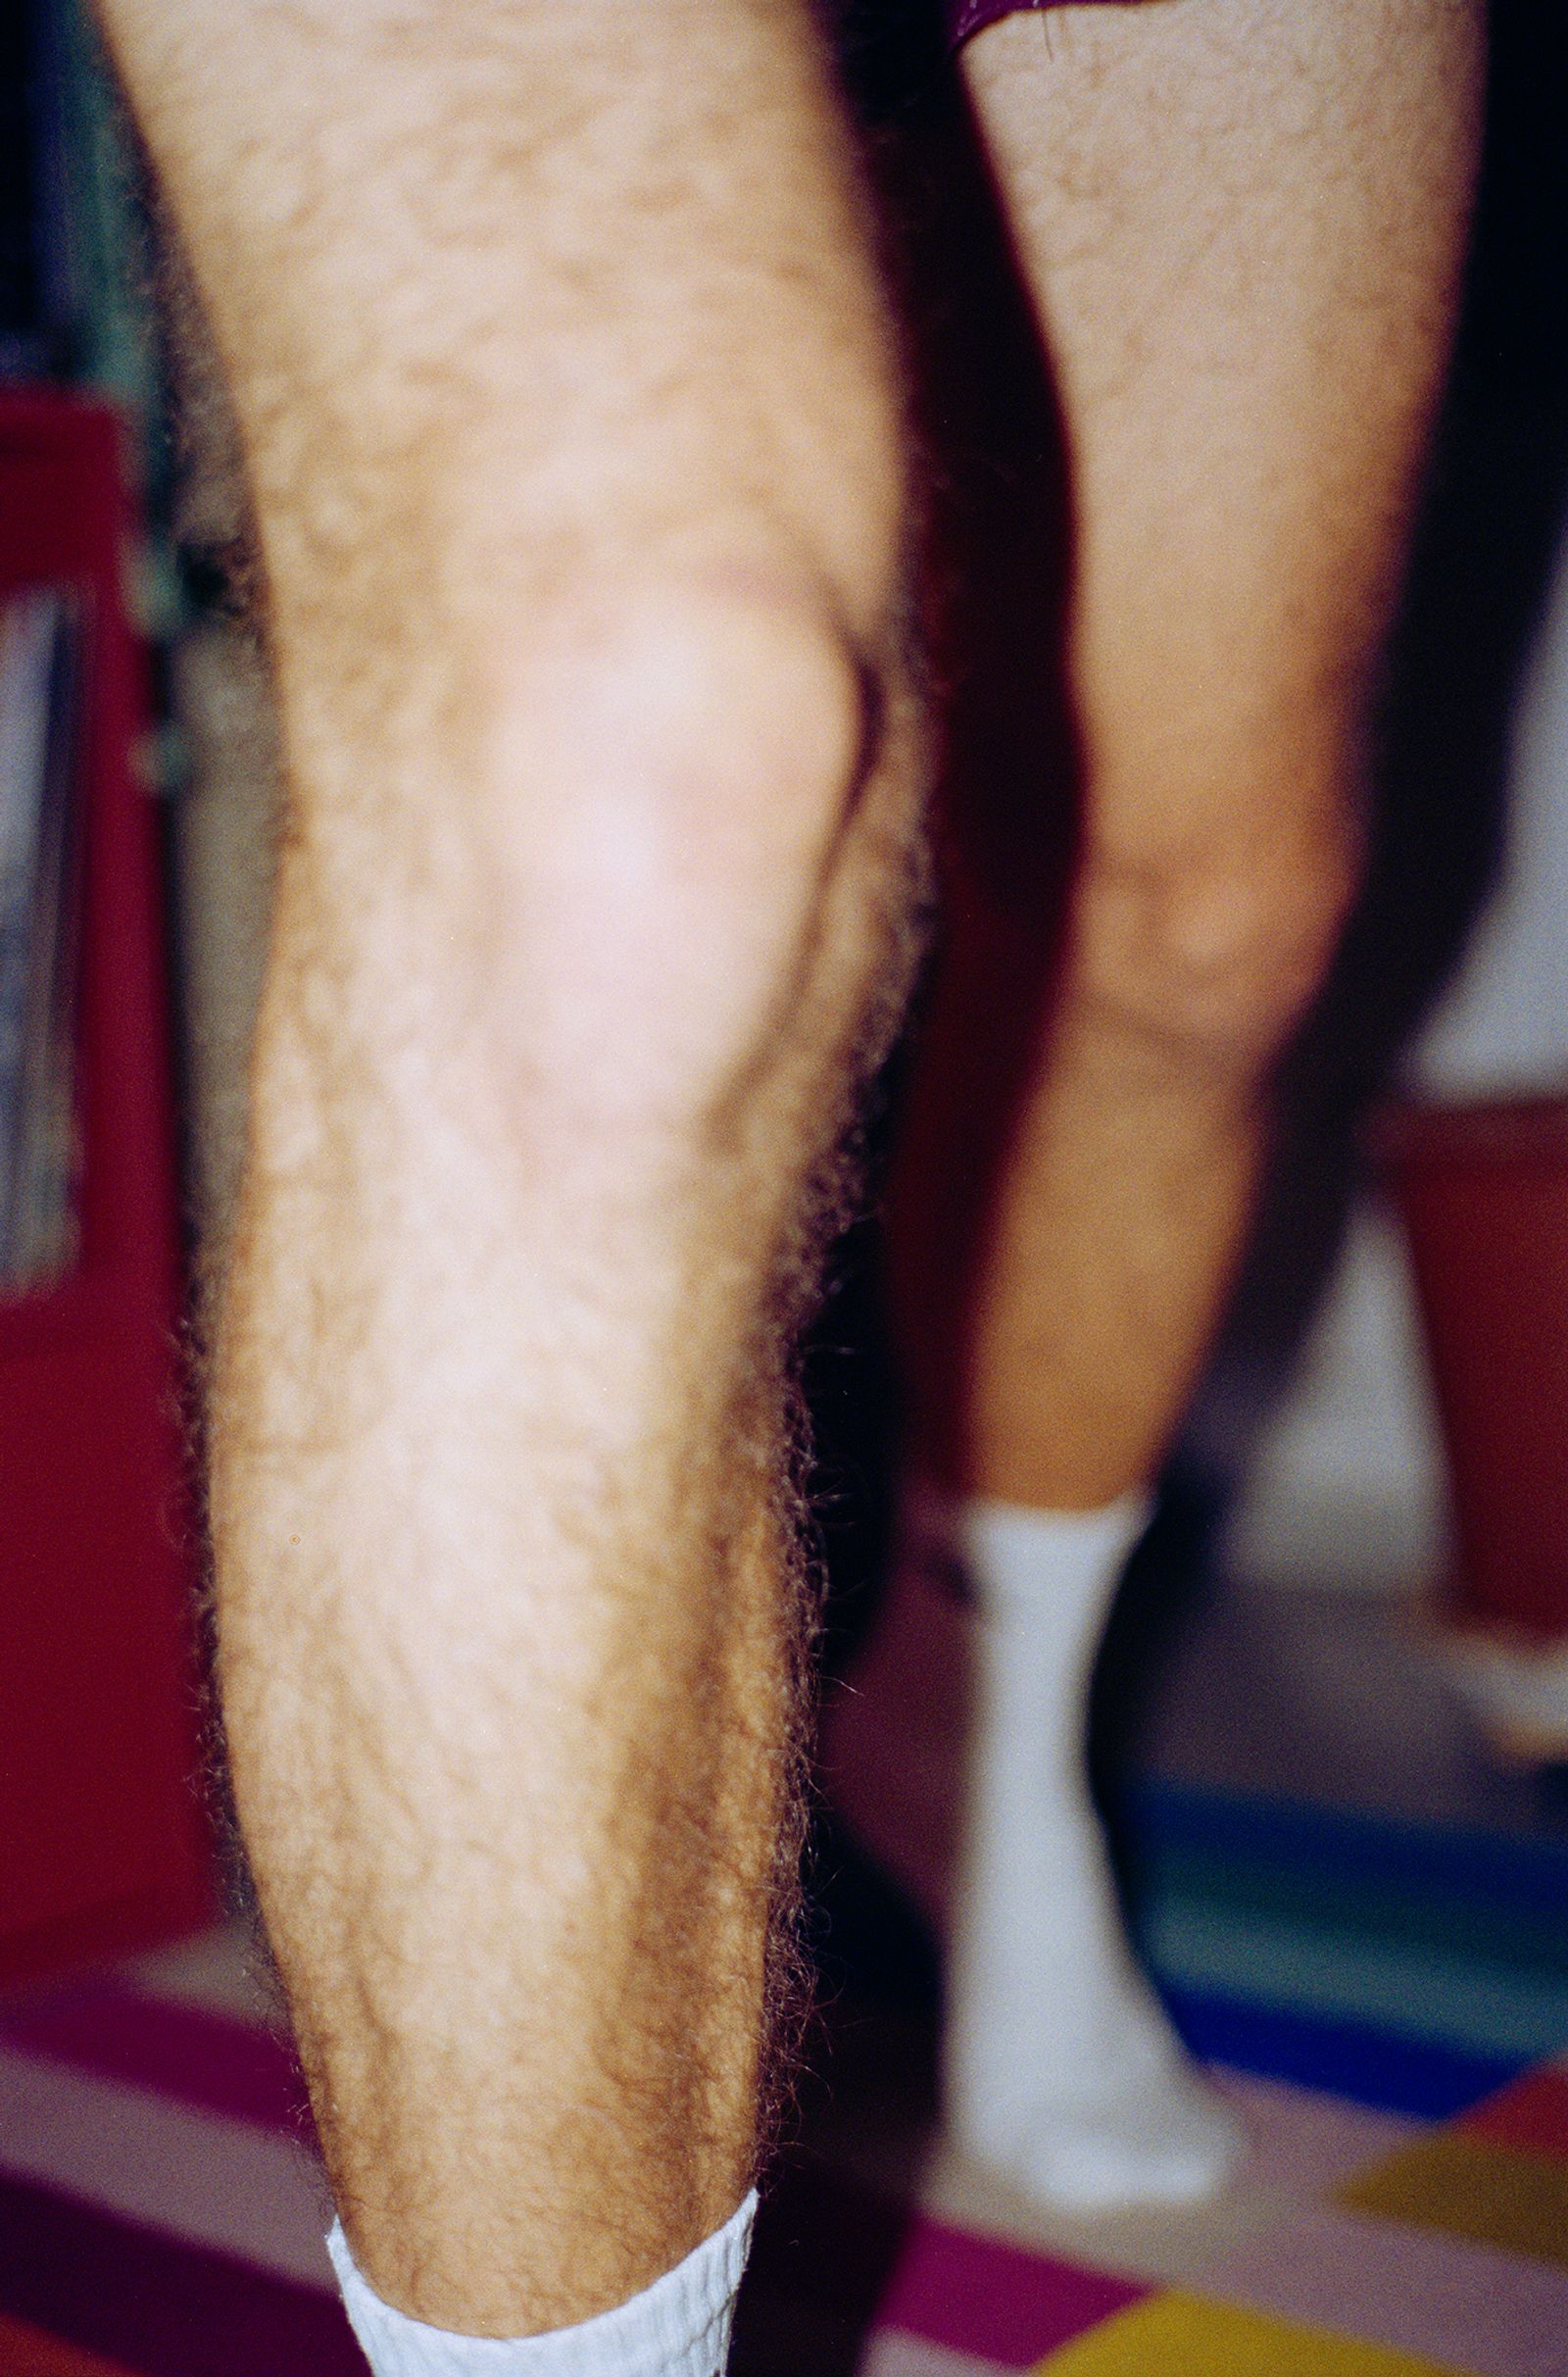 © Sara Perovic - Image from the My Father's Legs photography project